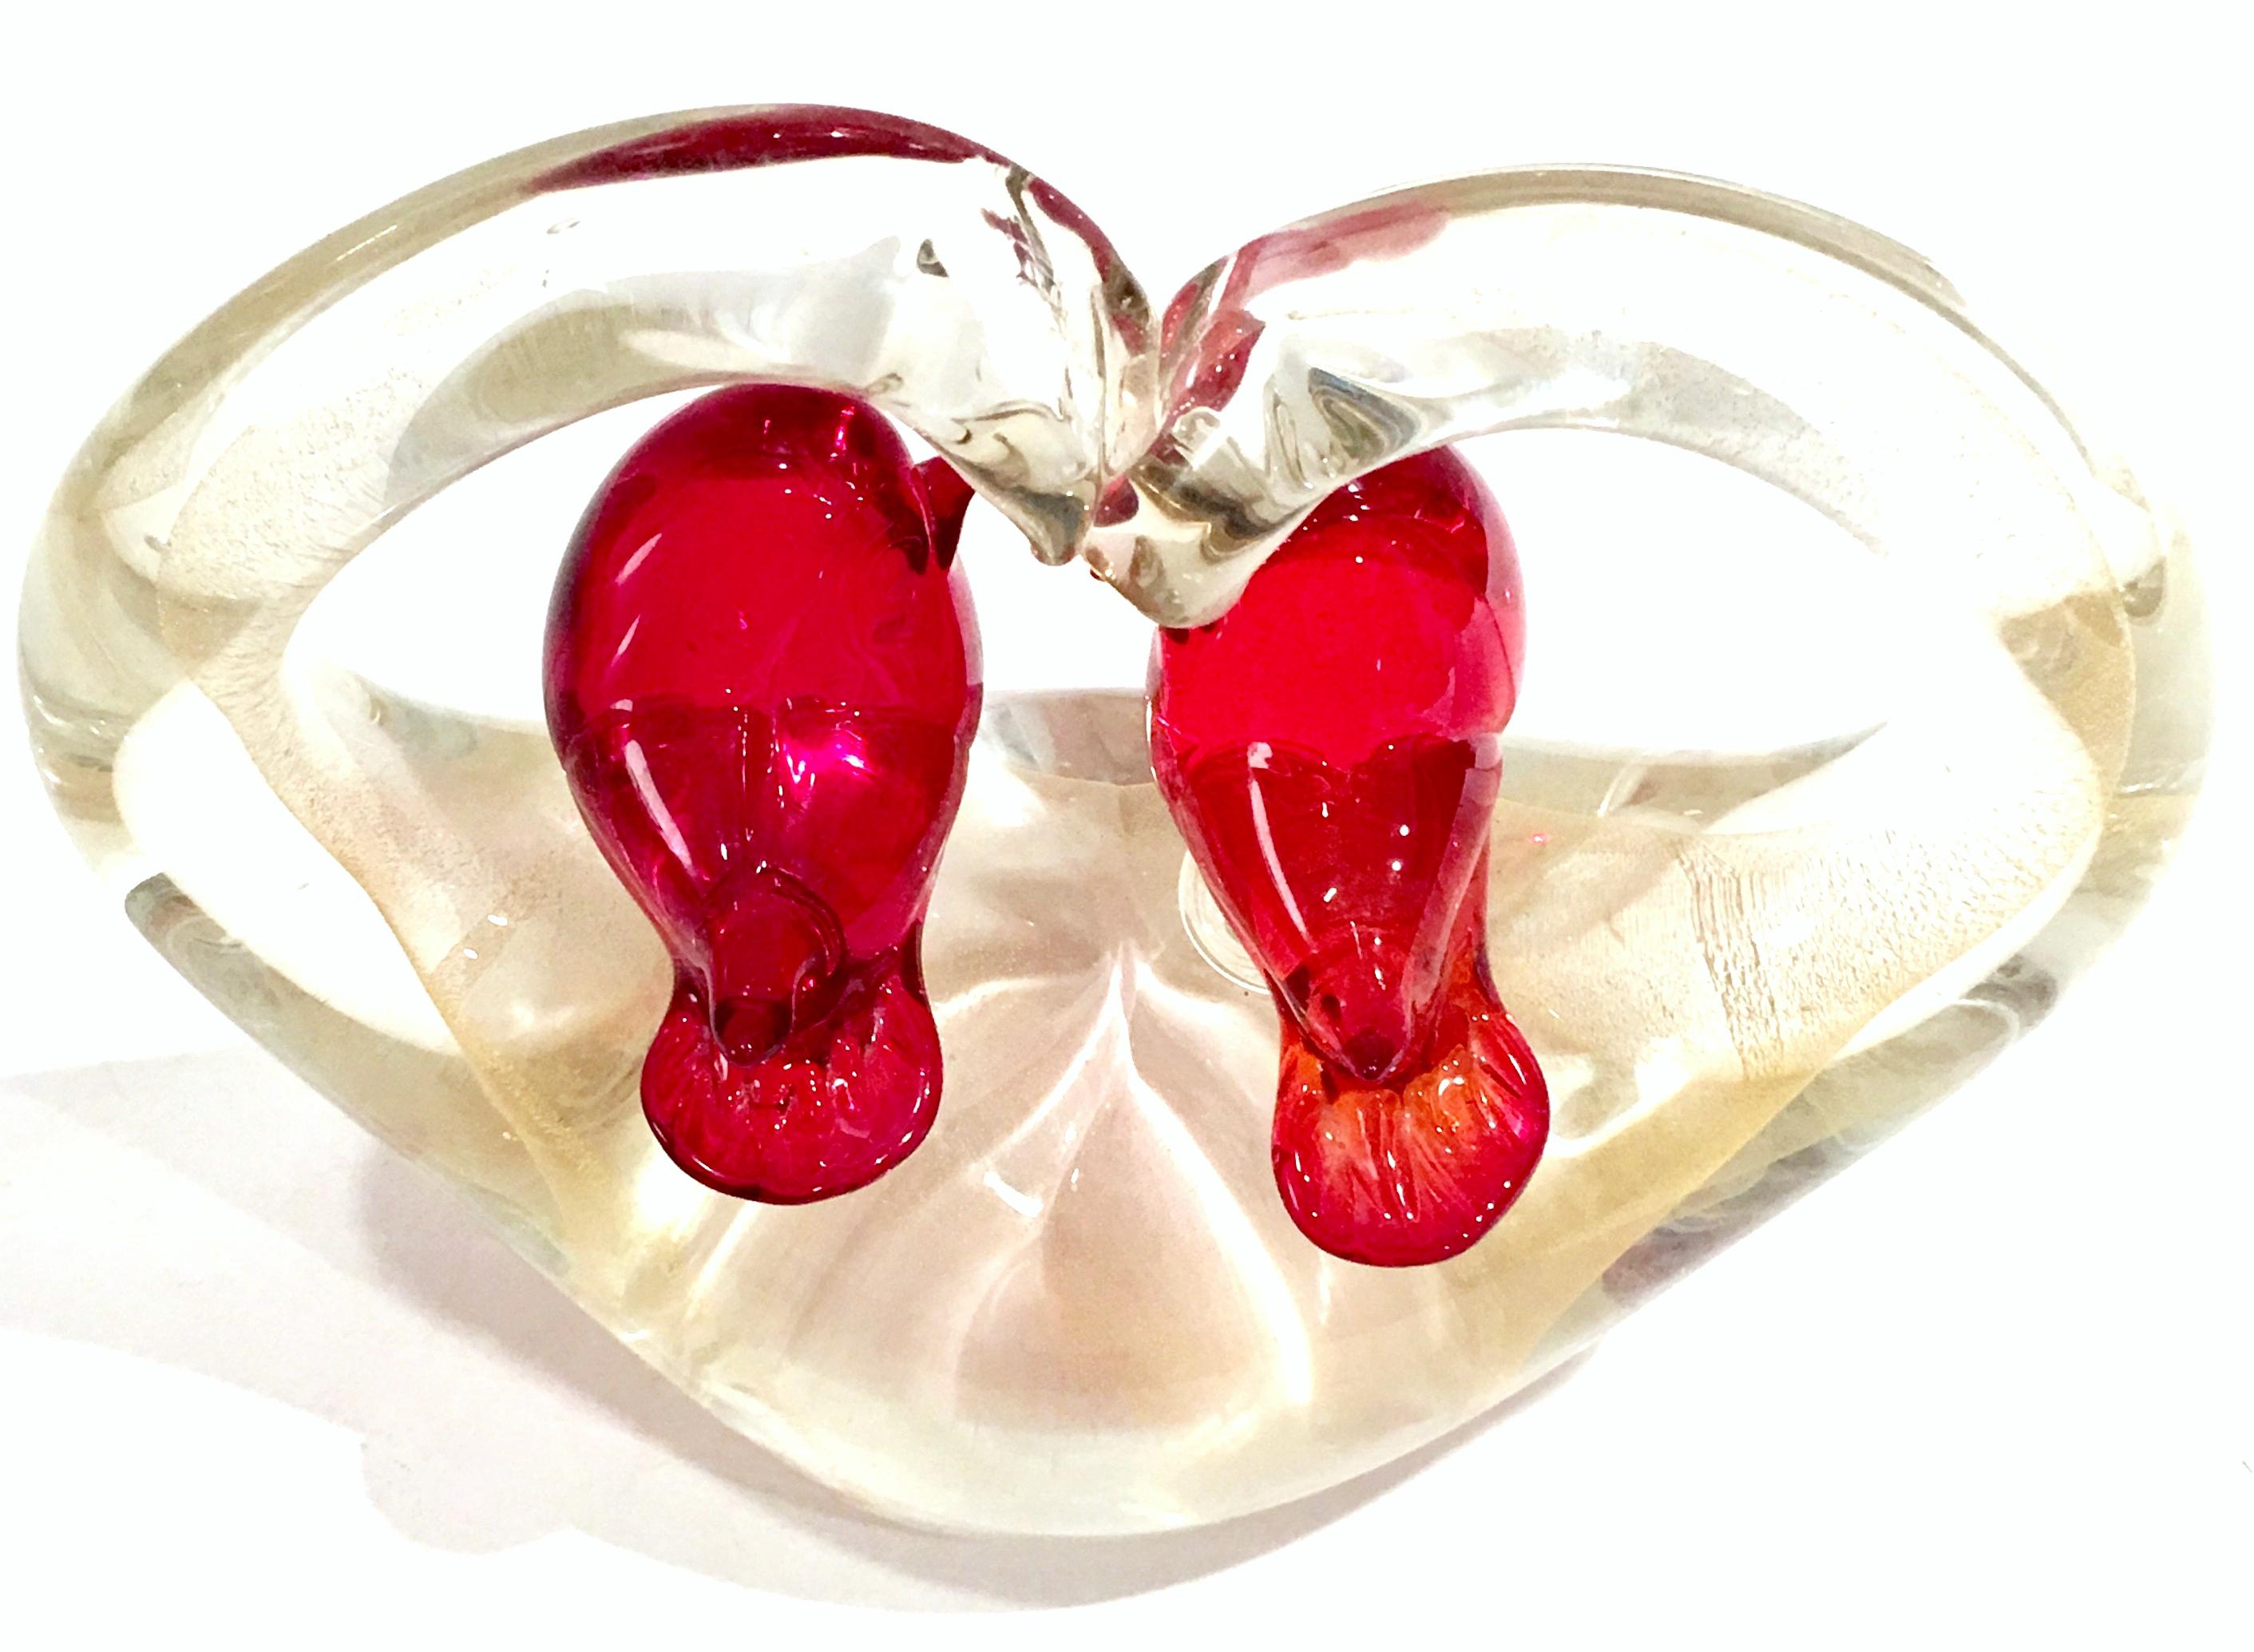 1950s Italian Murano Glass with Gold Fleck Pair of Love Birds Heart Sculpture For Sale 1